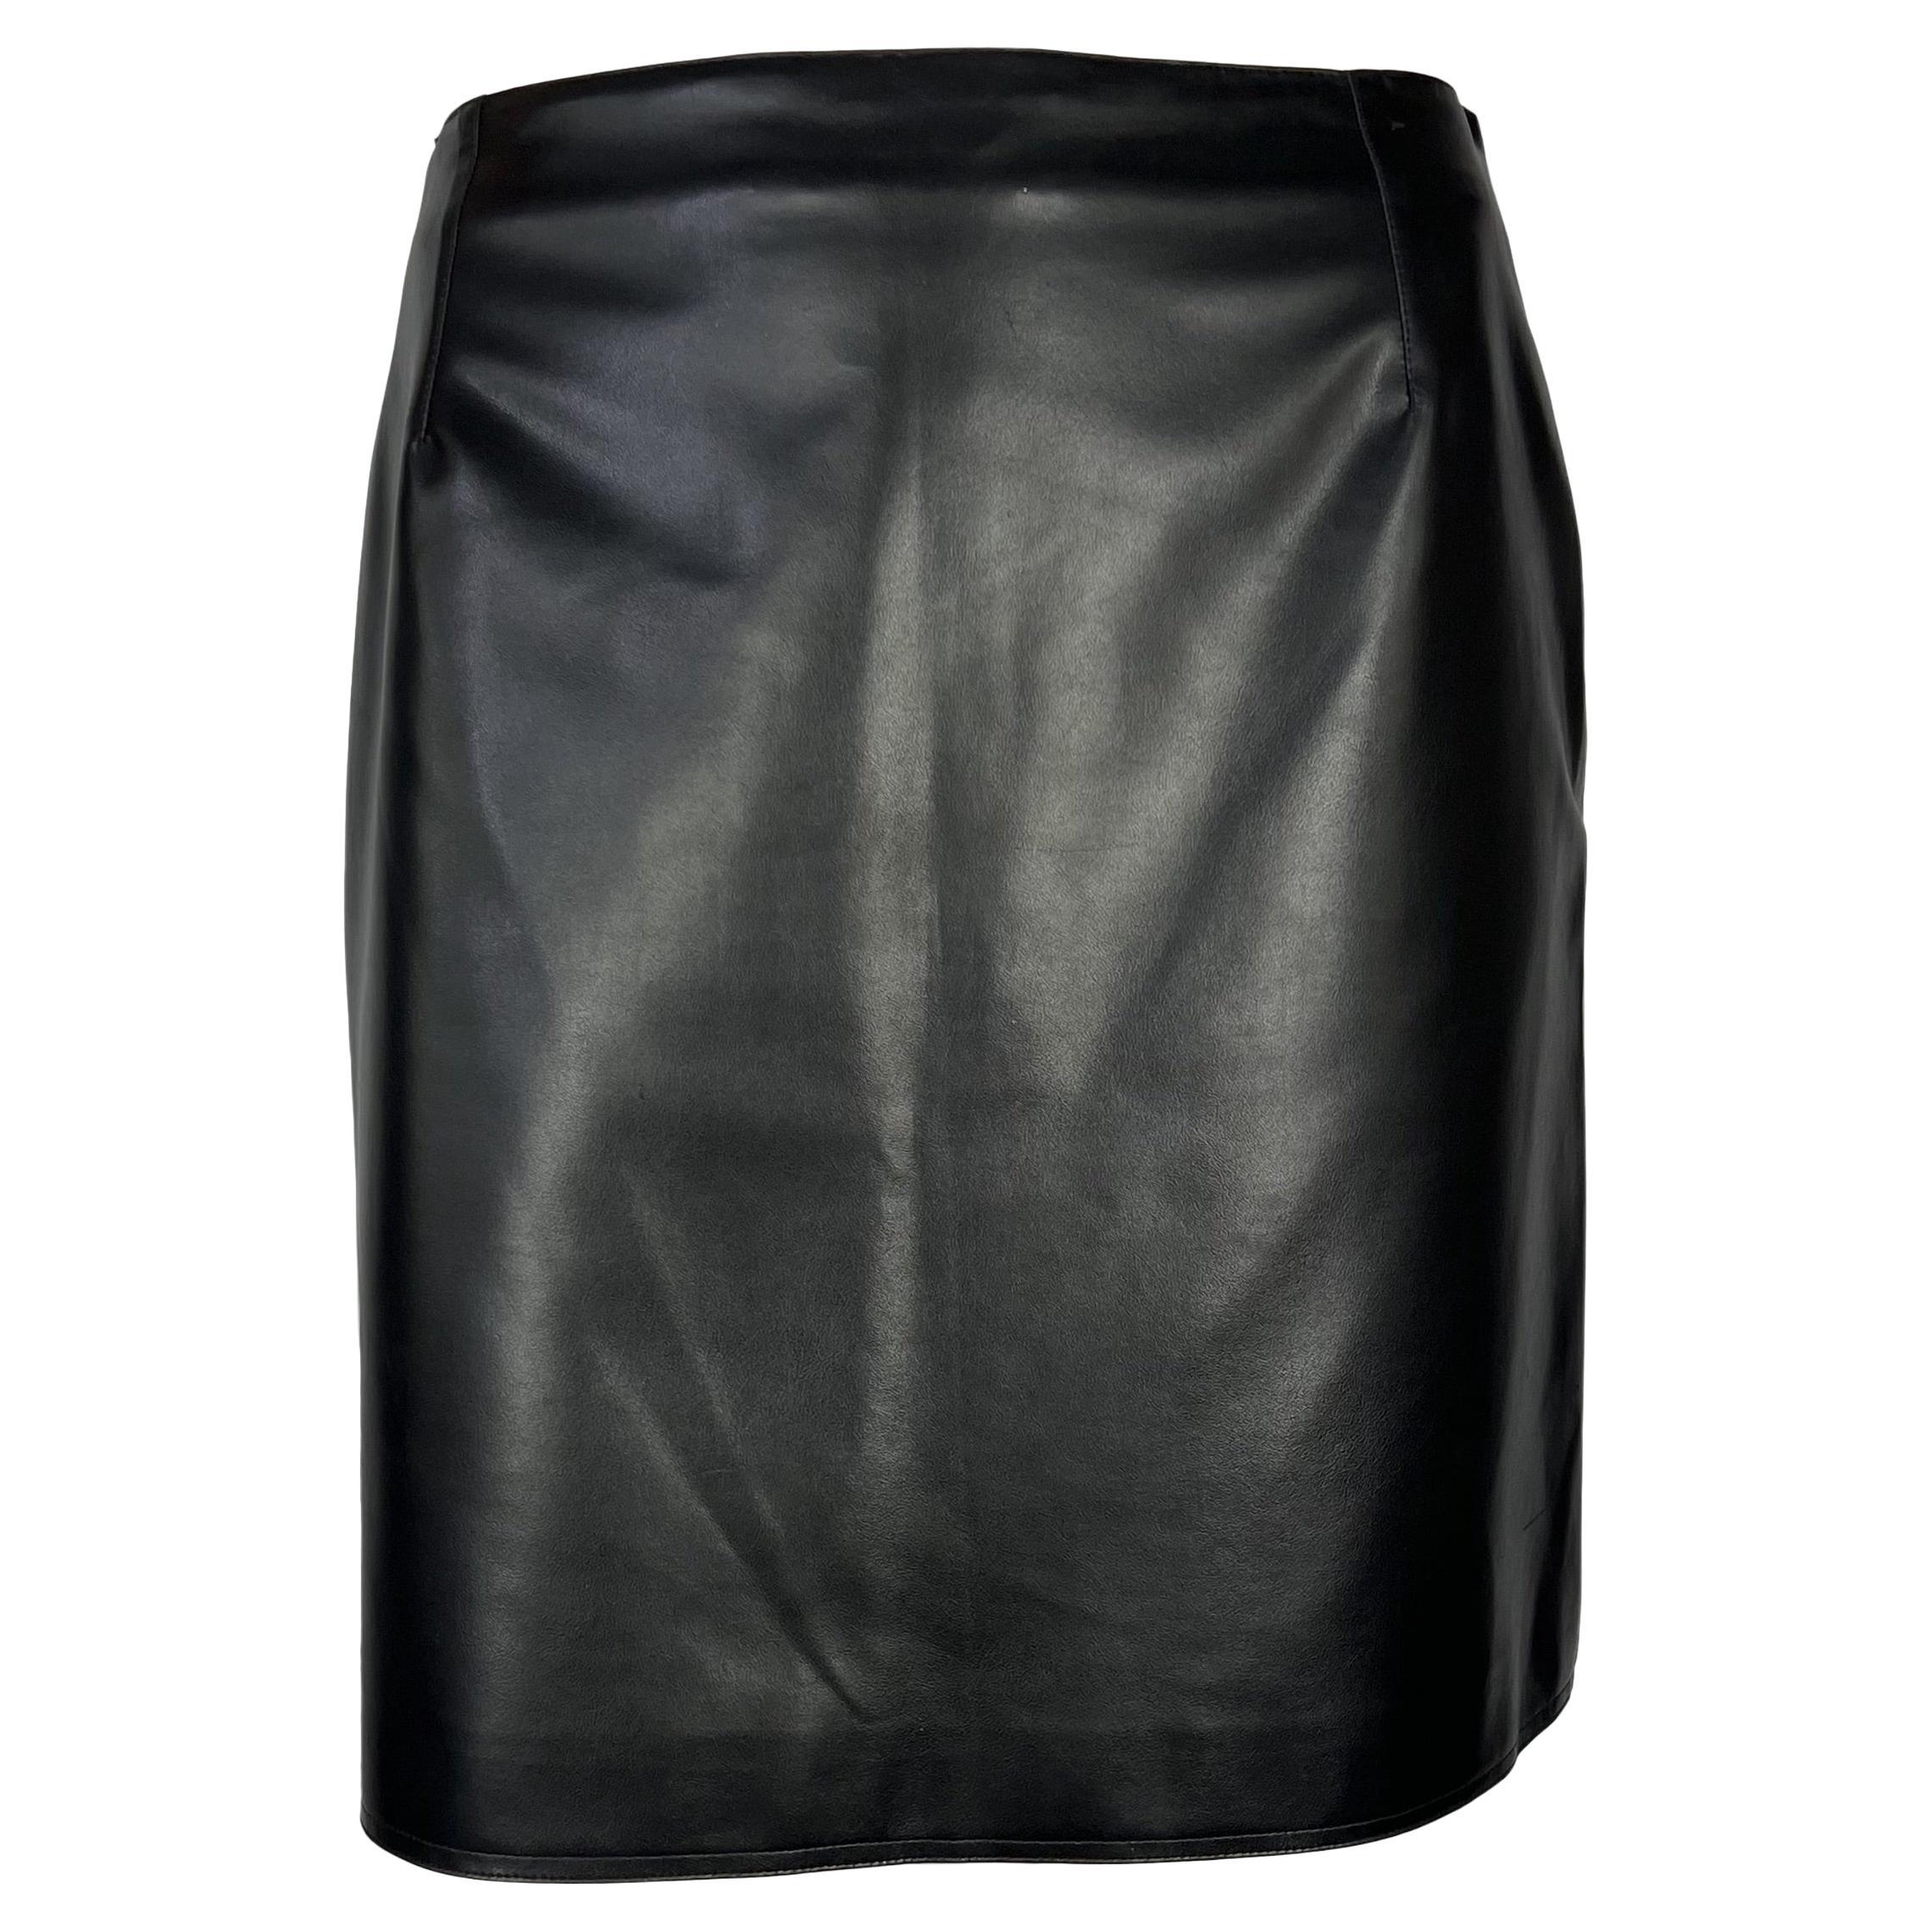 1996 Gianni Versace Couture Black Vegan Leather Mini Skirt For Sale